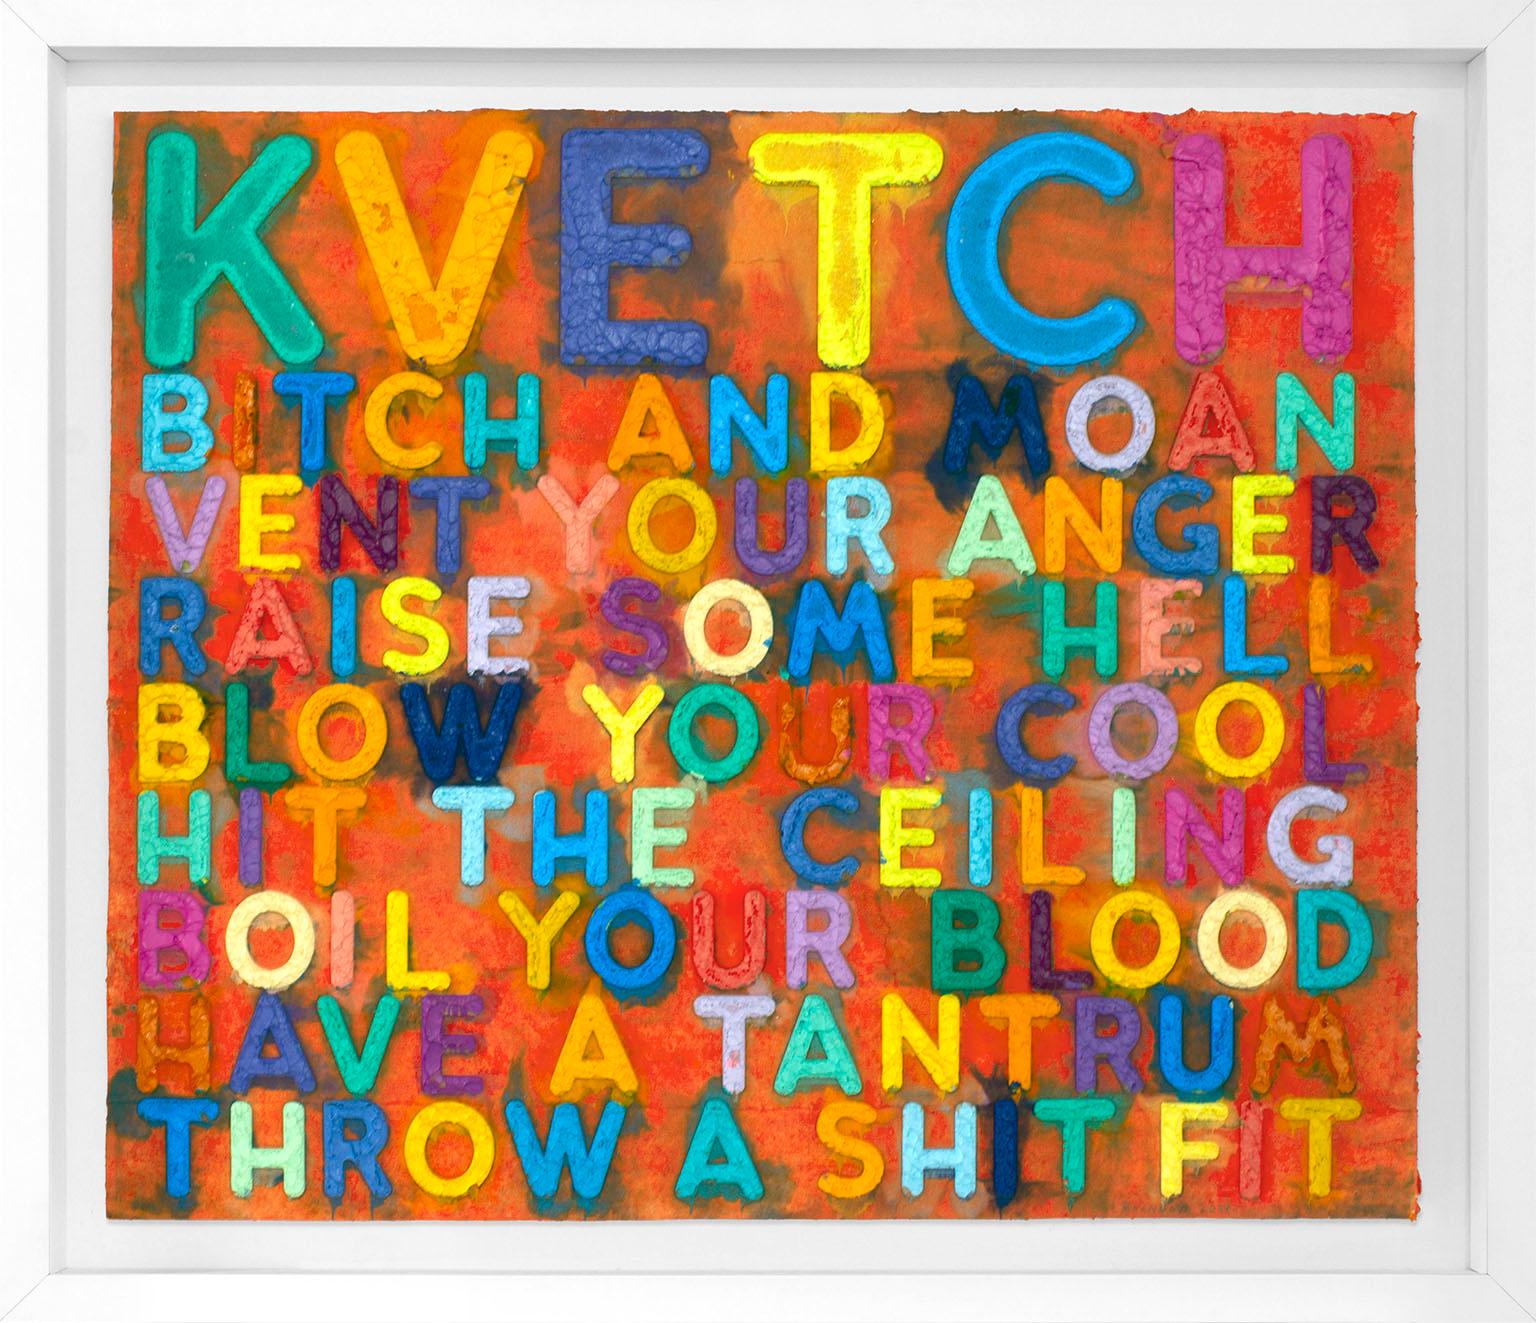 "Kvetch" monoprint in oil with collage, engraving and embossment on handmade paper by artist Mel Bochner from Two Palms Publishing. Signed and dated Bochner 2021 lower right recto. Image size: 25 1/2 x 29 3/4. Text reads: KVETCH BITCH AND MOAN VENT